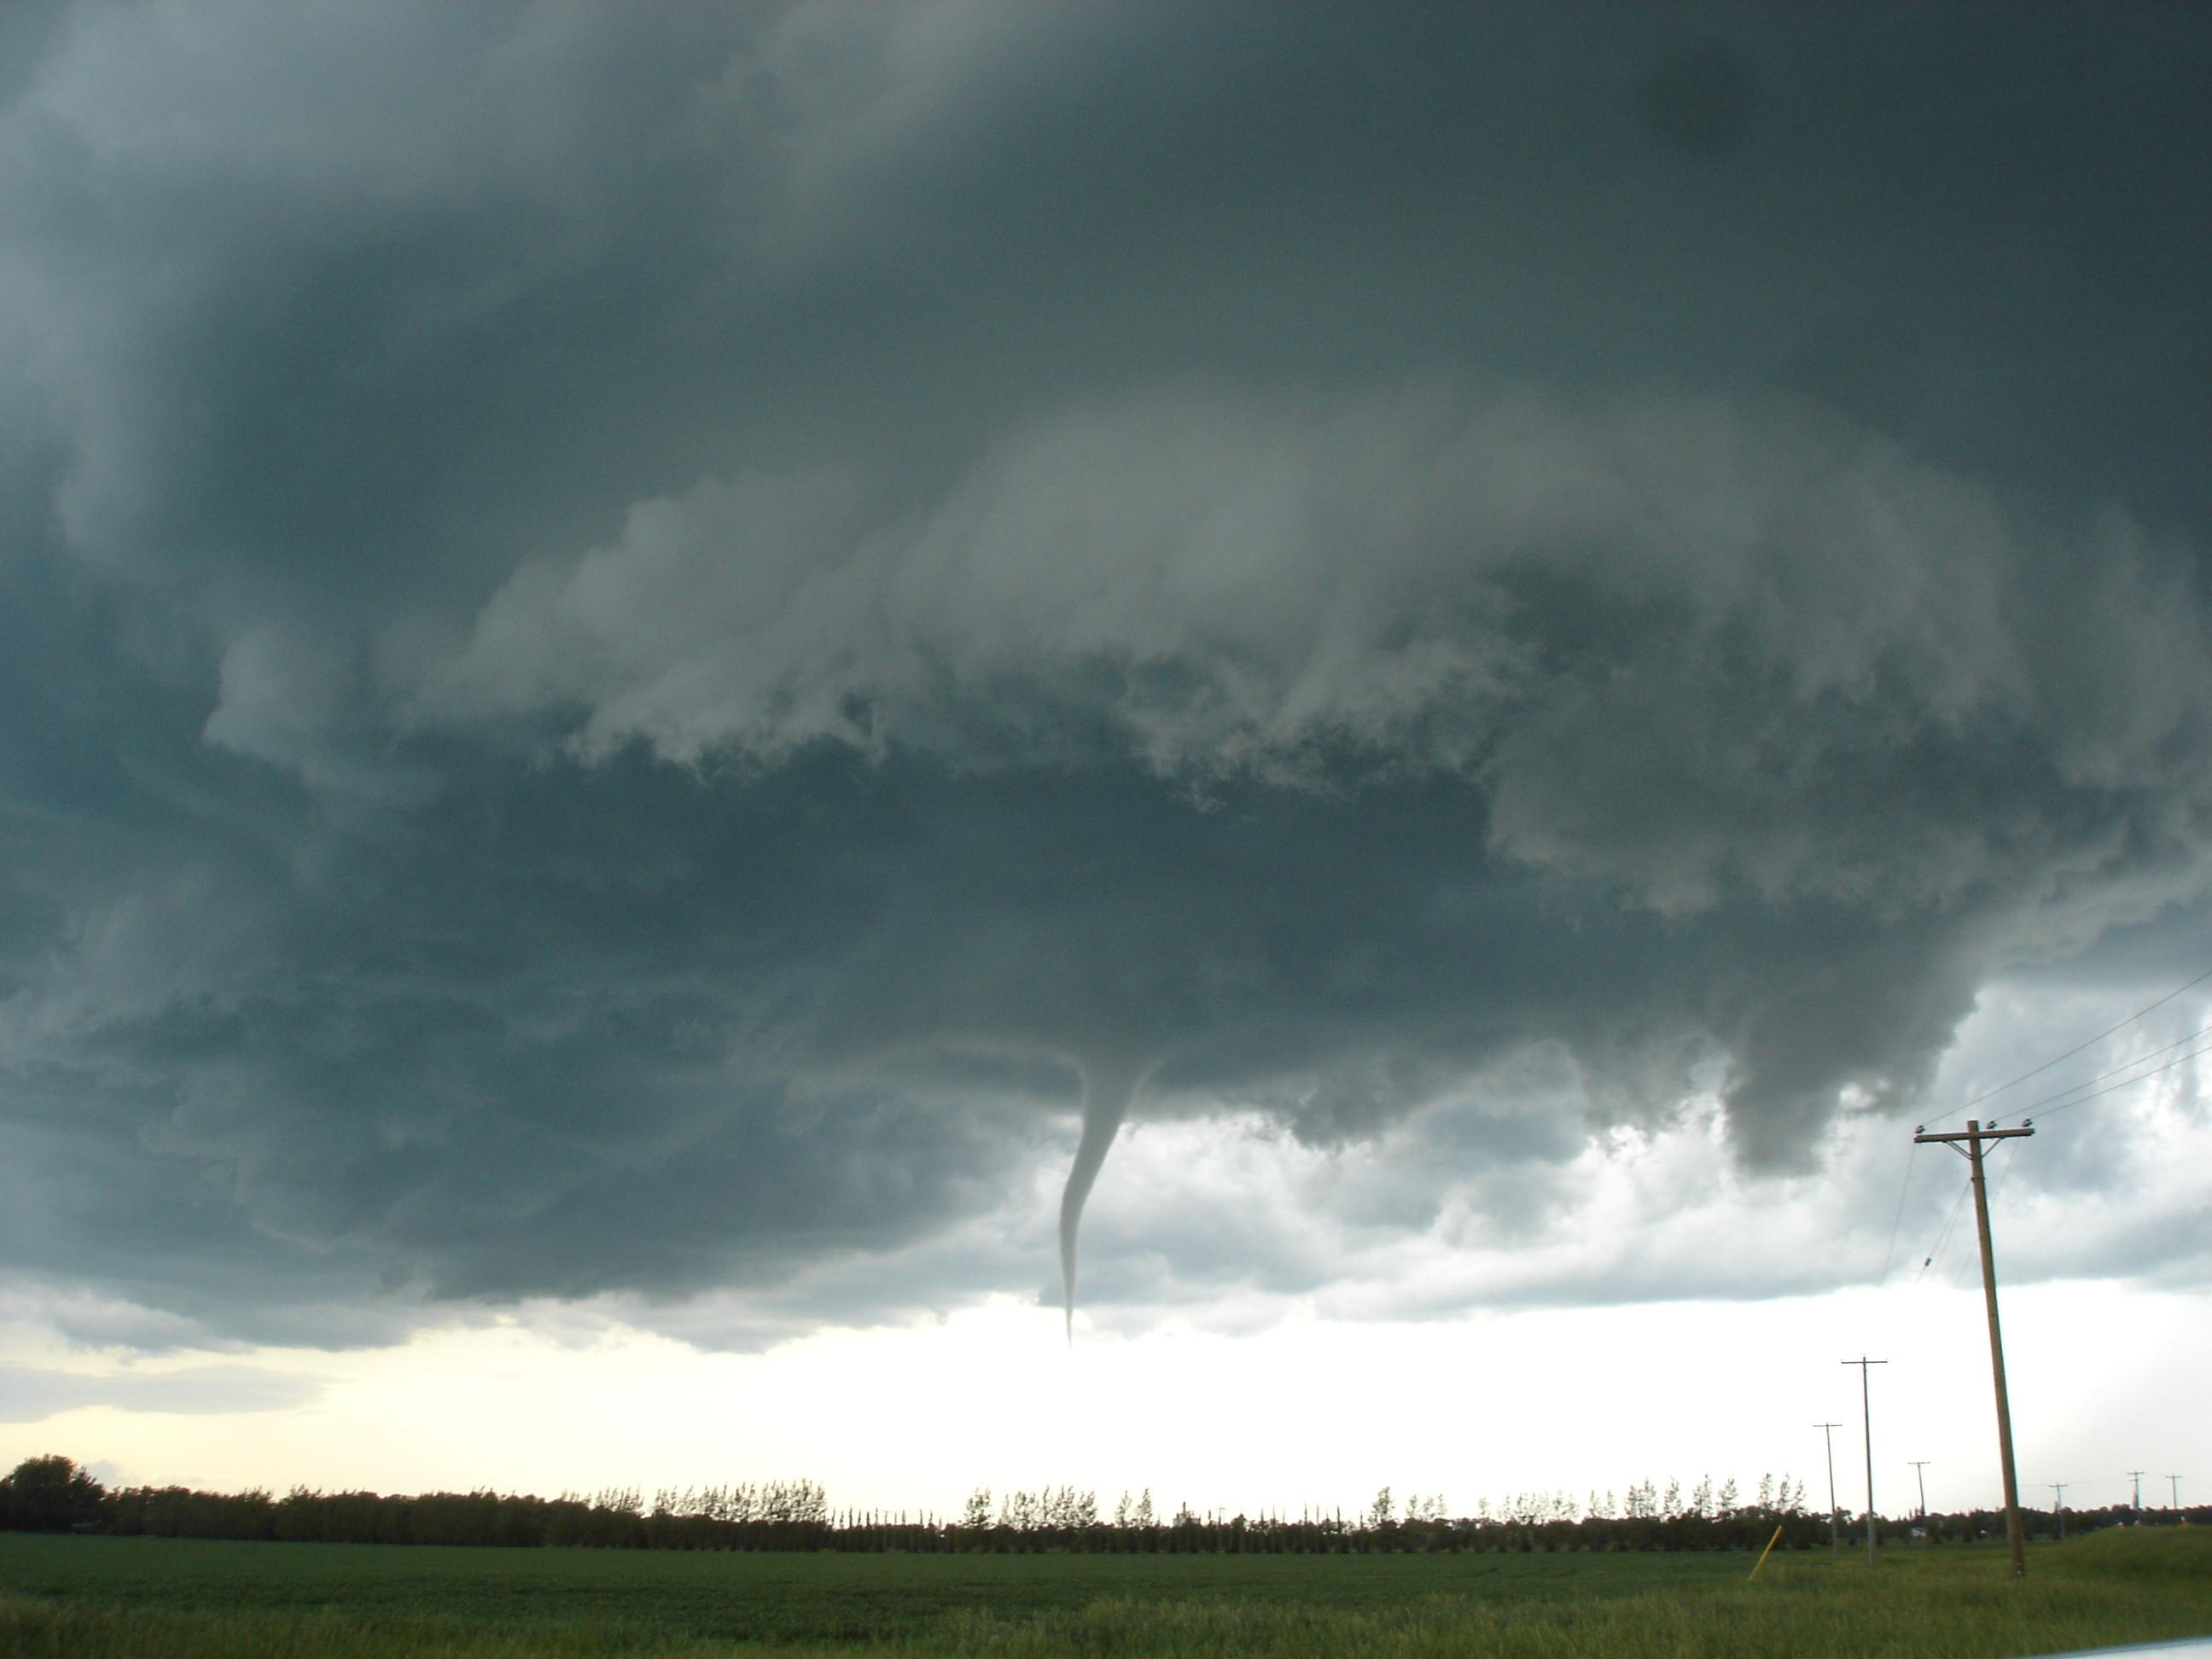 Funnel cloud, dangerous funnel clouds and tornado, dangerous clouds, recognize dangerous clouds: funnel clouds, viewed from the southeast, that produced a category F5 tornado (inital estimate of F4) that hit Elie, Manitoba on Friday, June 22nd, 2007.